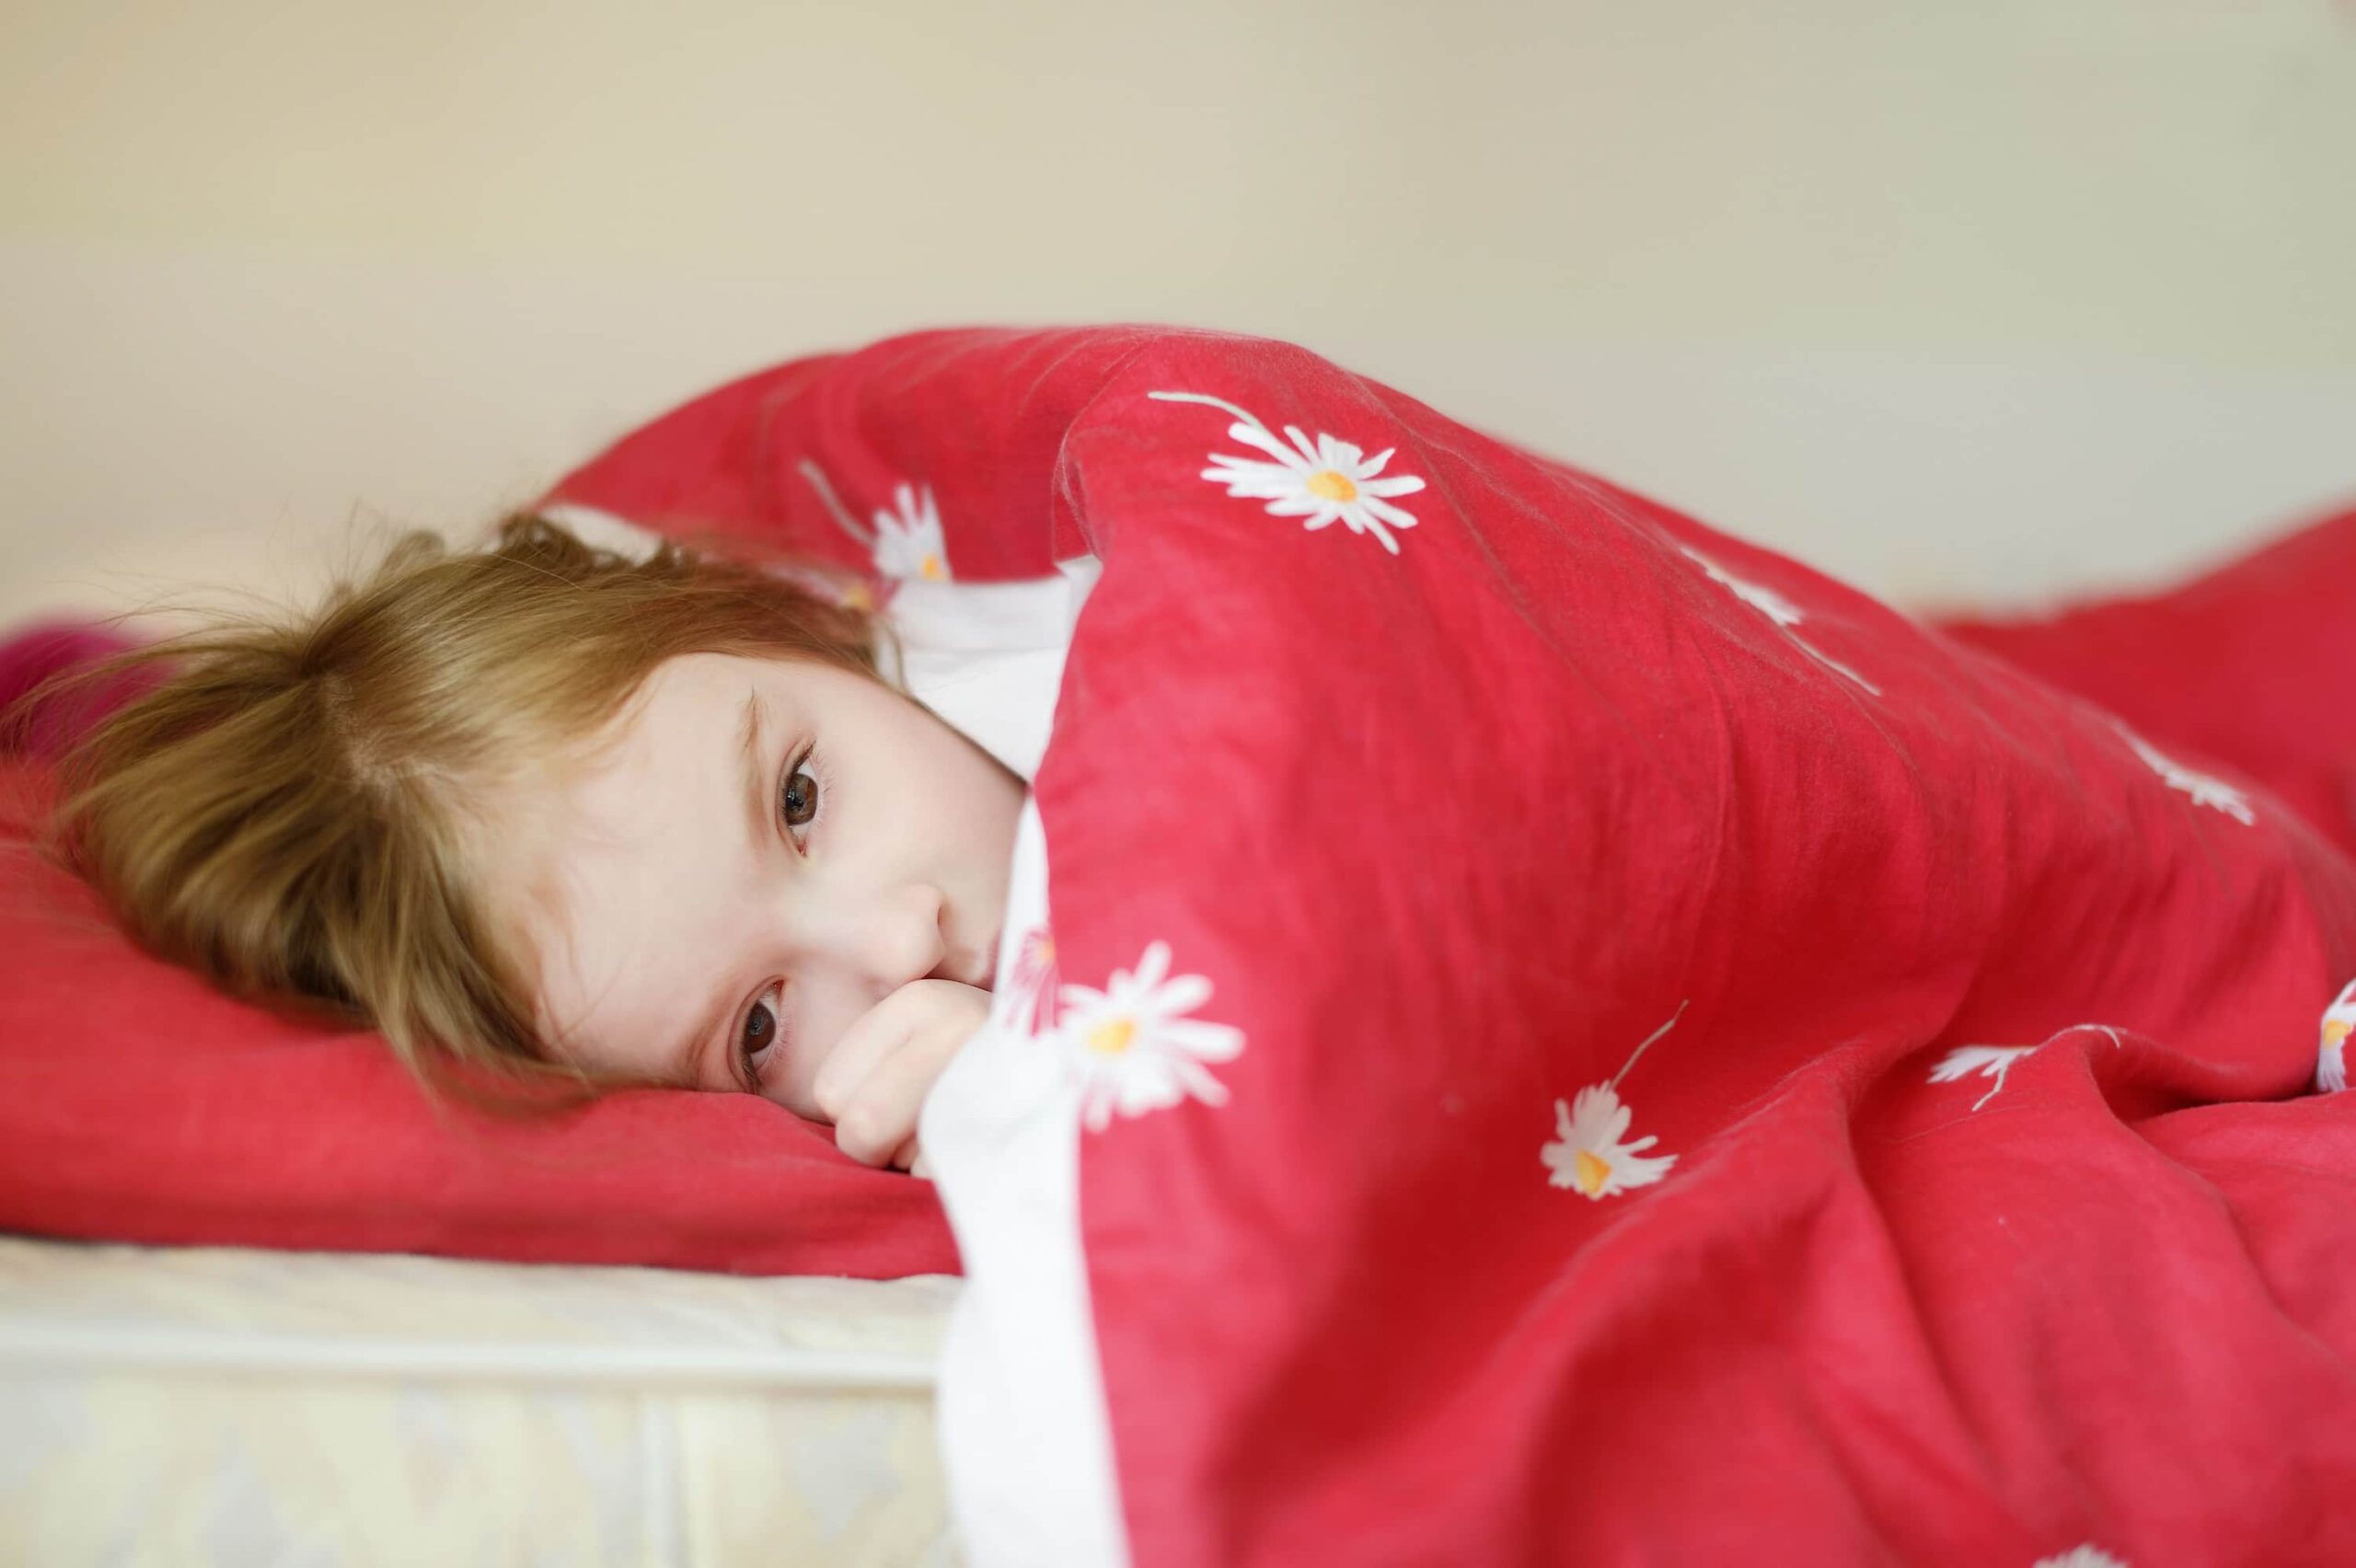 Toddler bedtime can go from bad-to-worse. All it takes is a slight change in routine, excitement, or distraction on the parents part and bedtime can turn into an extended battle. Today, I'm sharing my tips on Dr Orlena Kerek's blog on how to end toddler bedtime battles. These strategies are rooted in positive parenting. These parenting tips for toddlers also apply to older children too.